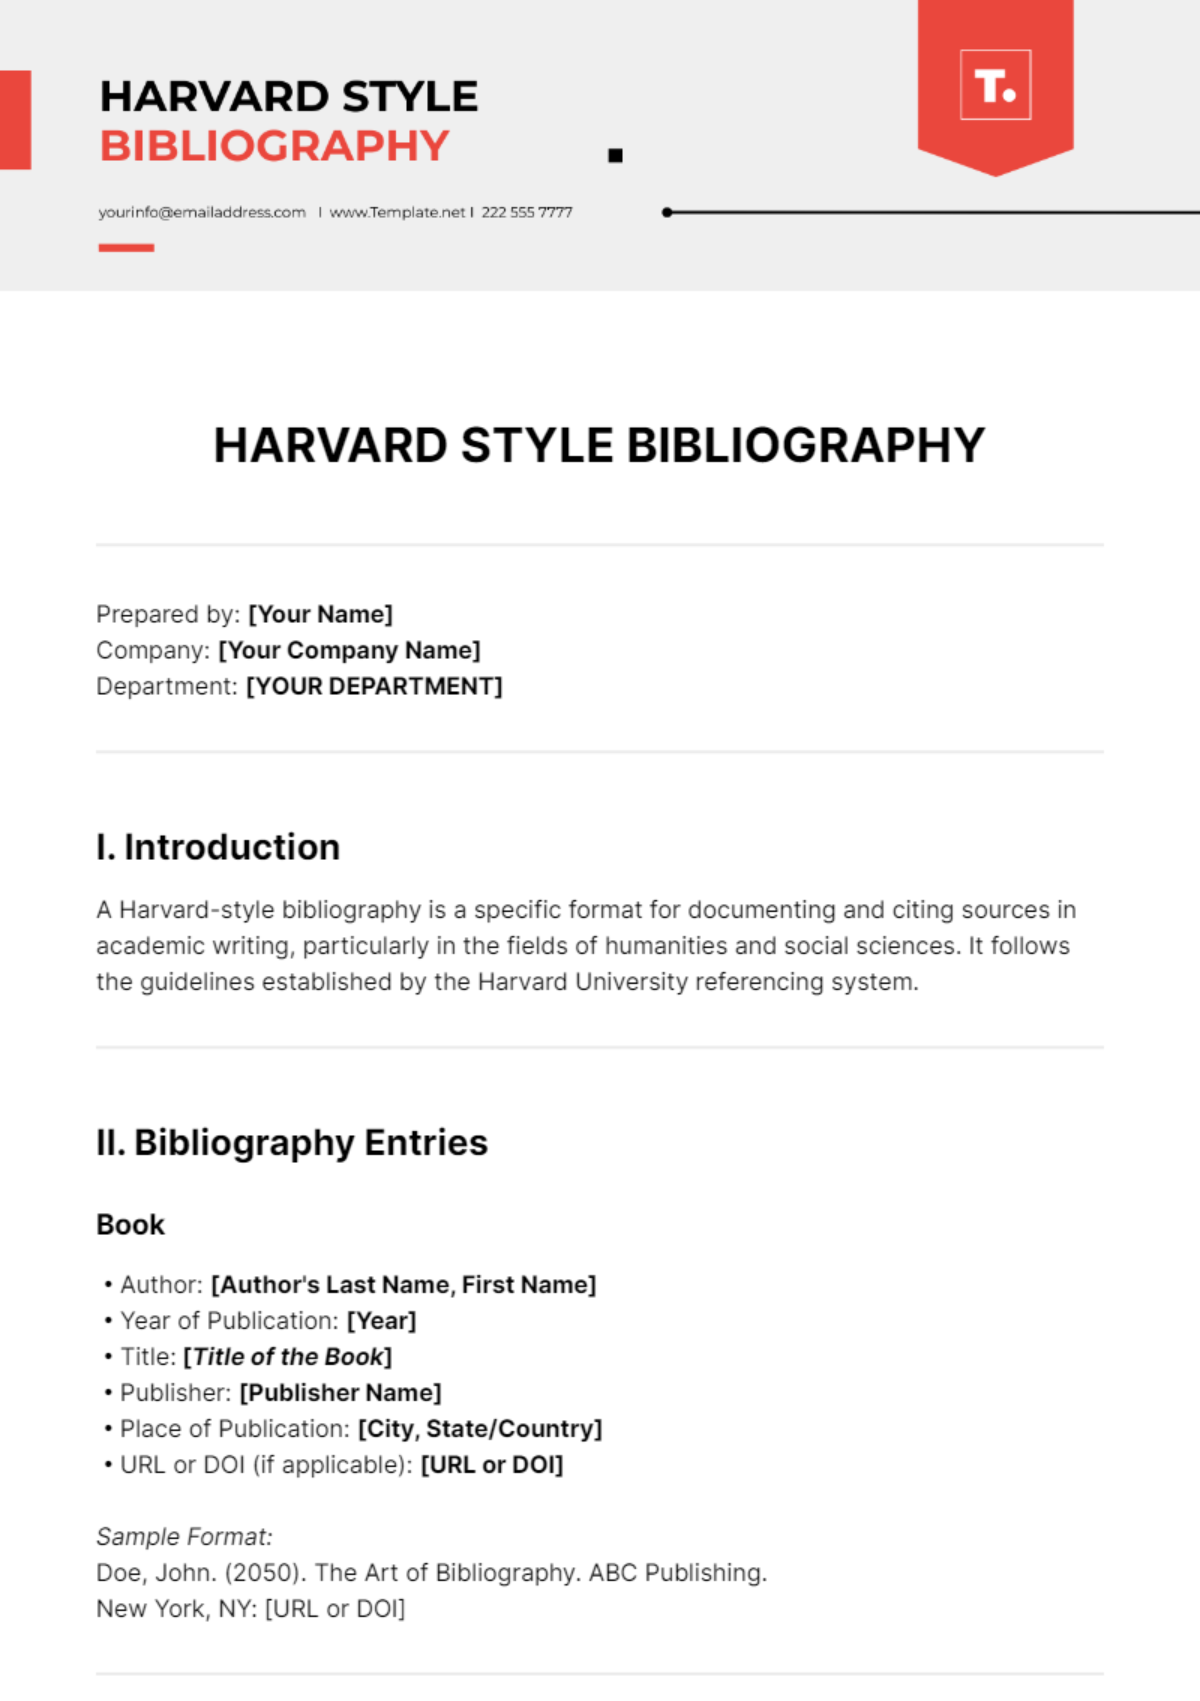 Free Harvard Style Bibliography Template